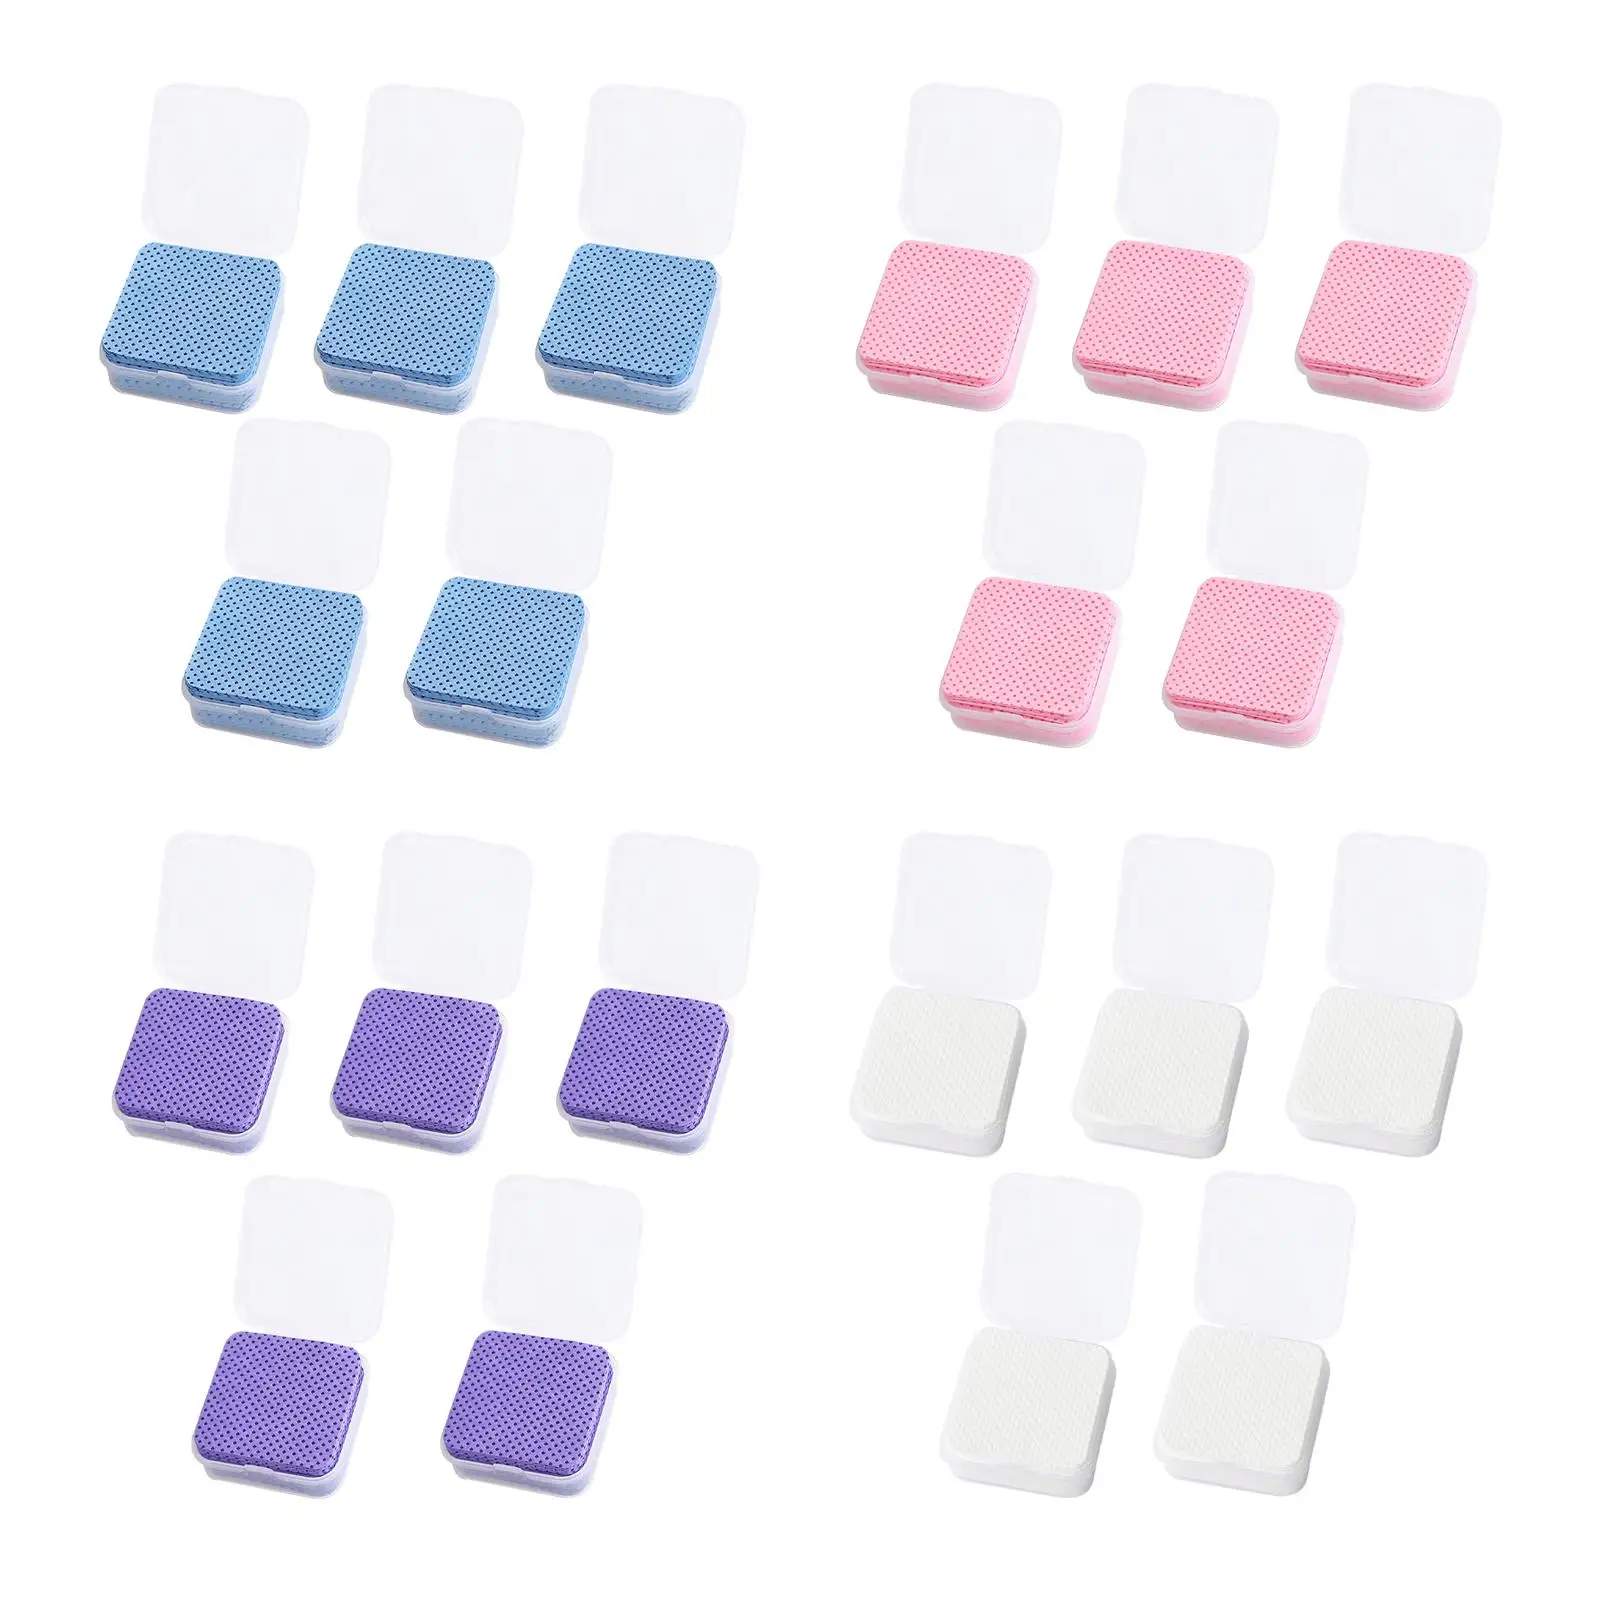 250x Diamond Painting Glue Remover Wipe for Eyelash Extension Accessories Nail Polish Remover Wipe Lash Extensions Glue Wipes